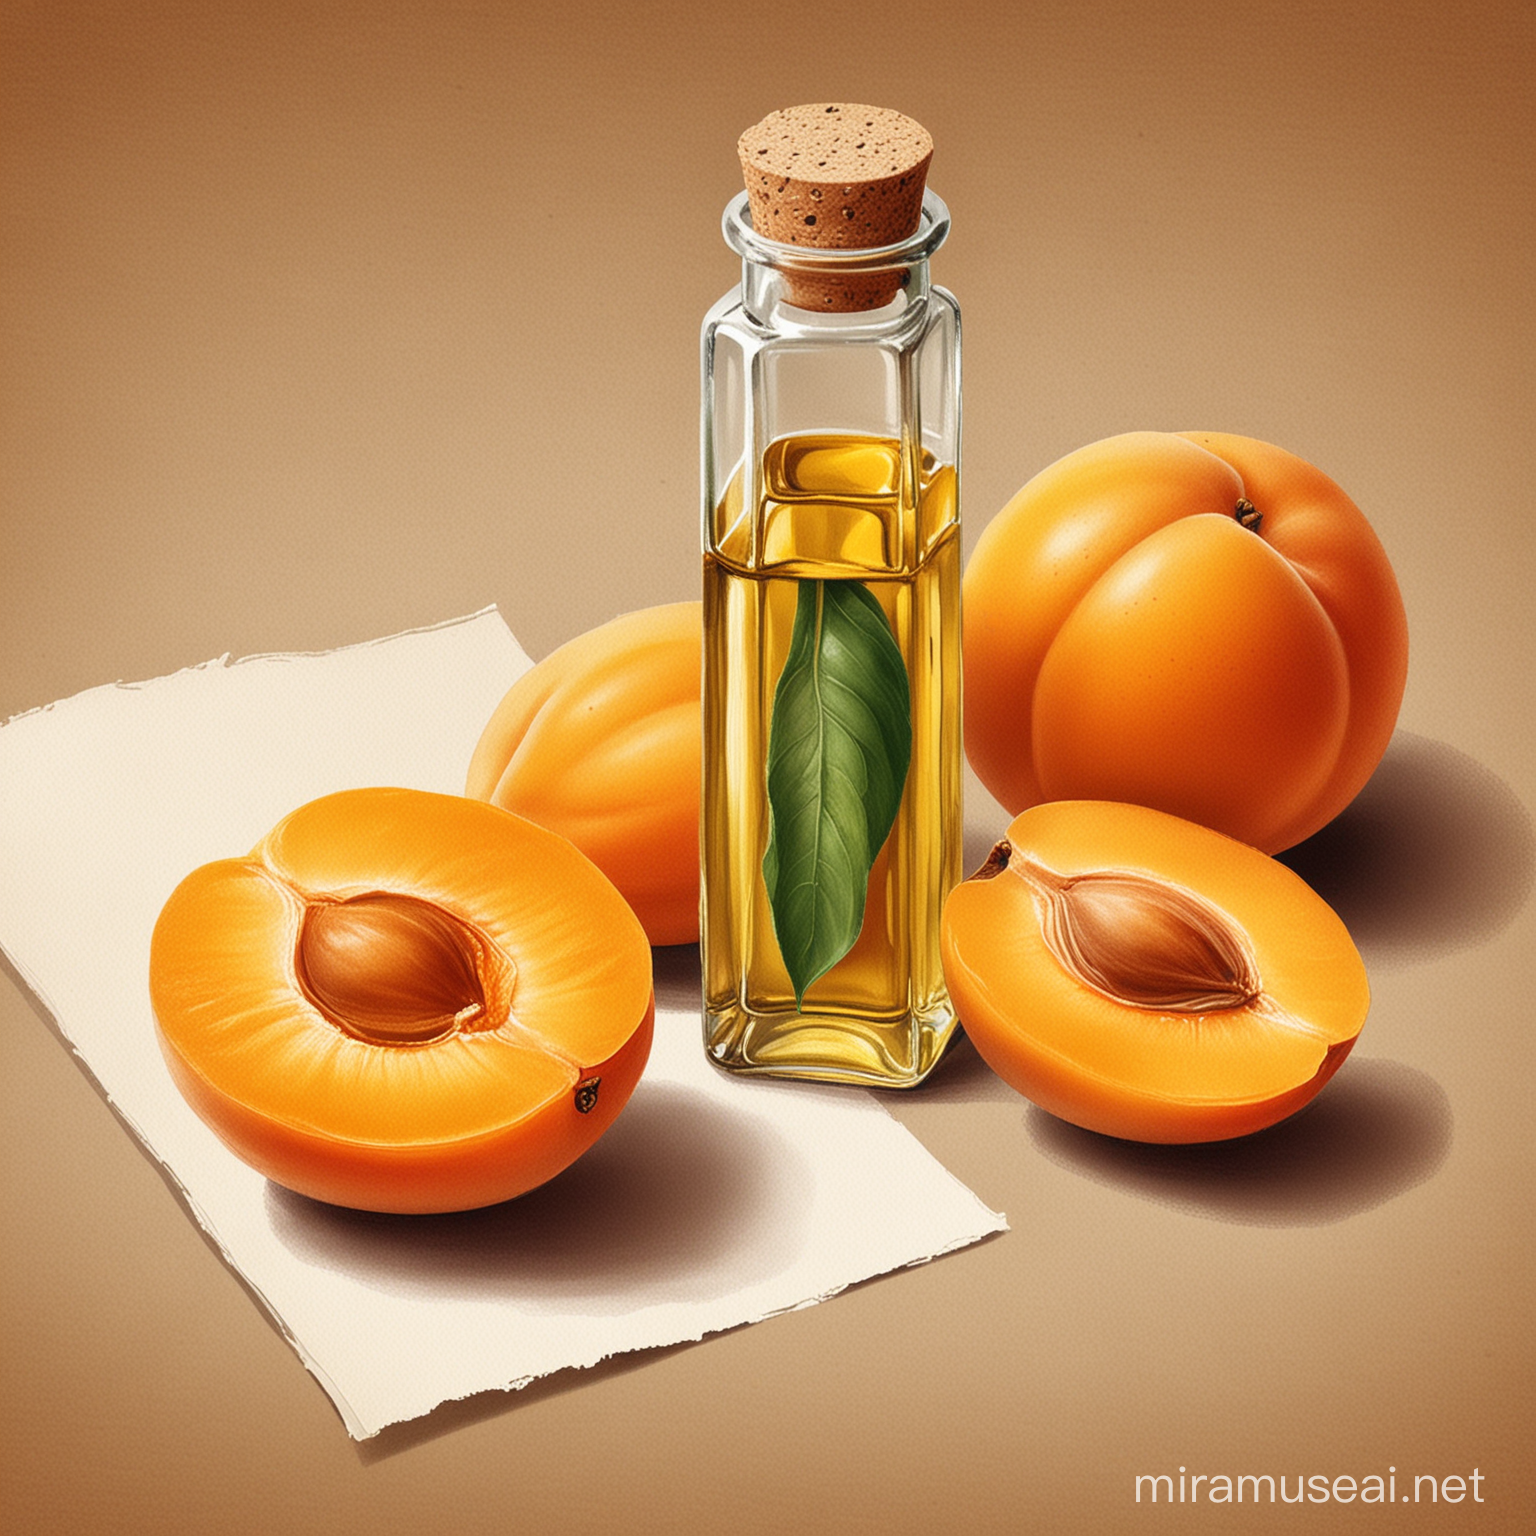 Natural Apricot Kernel Oil Extraction Sketch